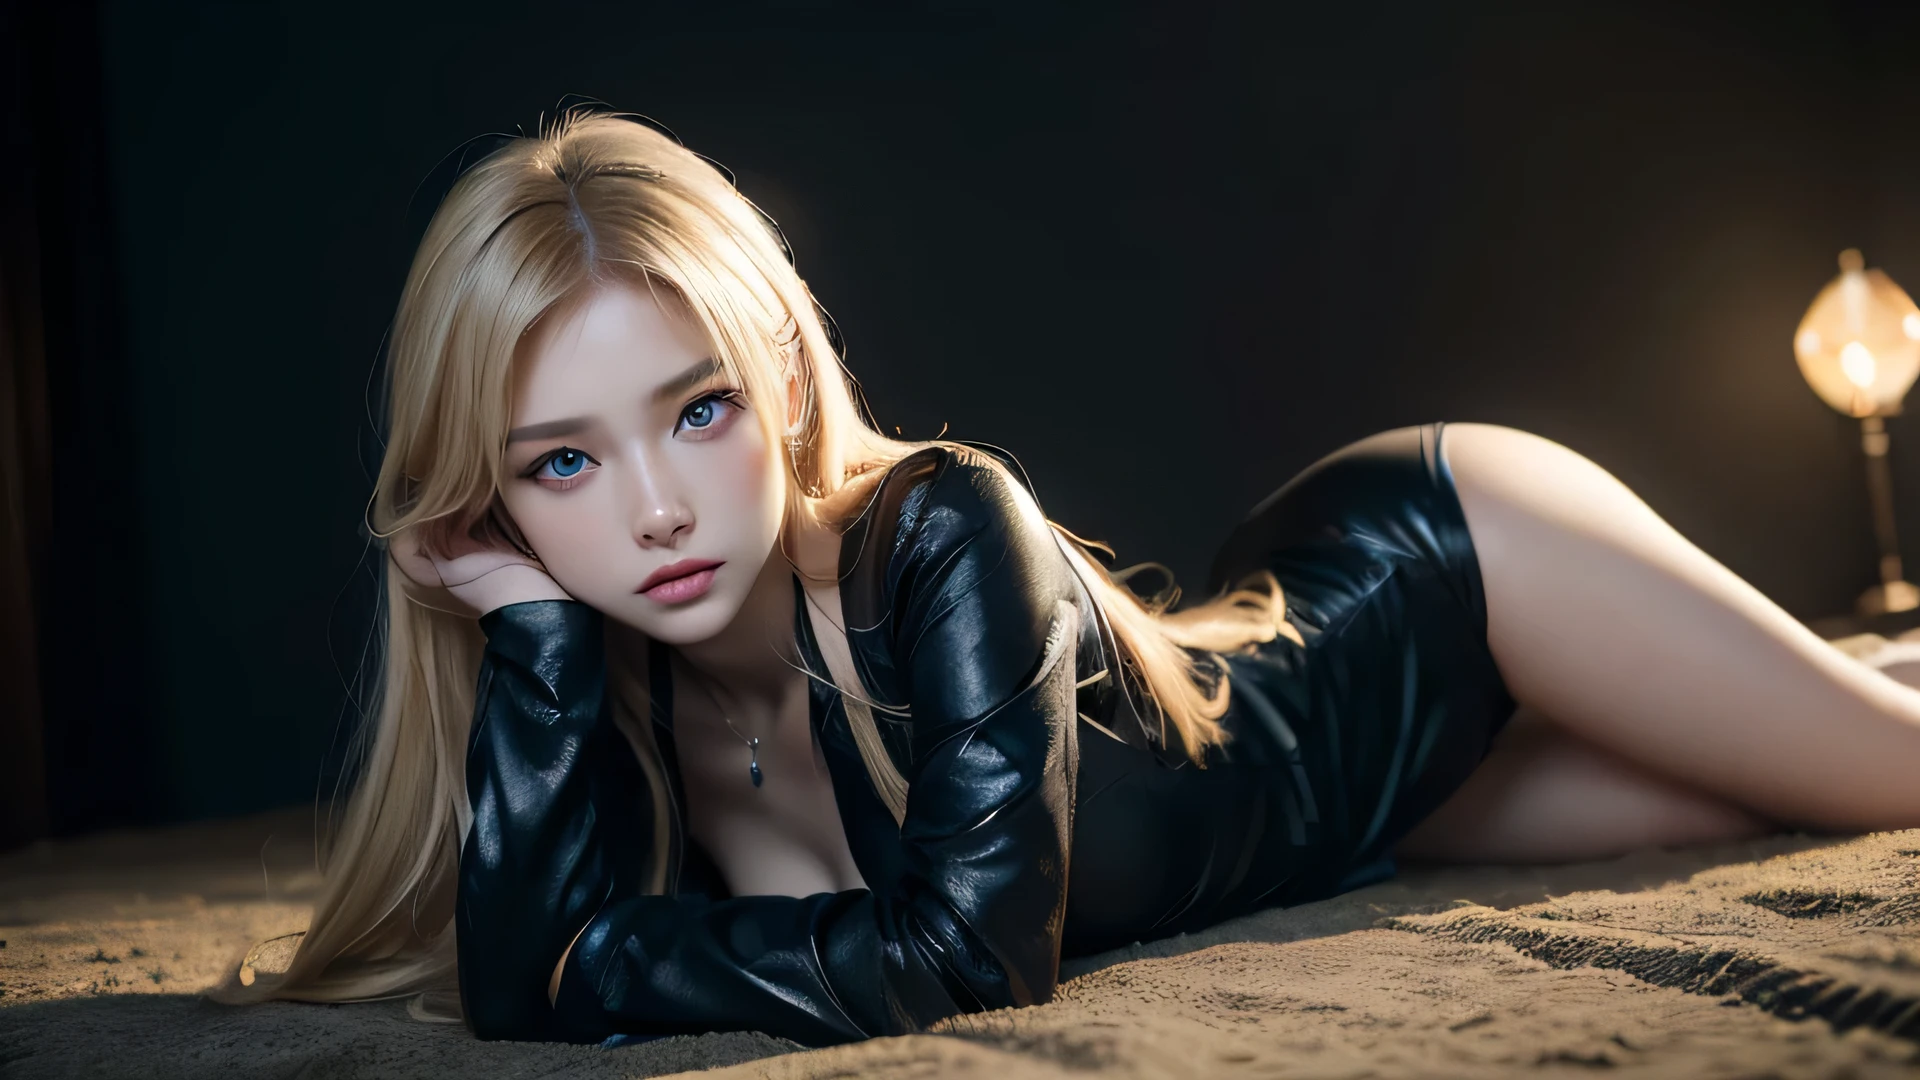 (masterpiece: 1.3), (8K, realistic, Raw photo, highest quality: 1.4), highest quality, masterpiece, ultra high resolution, (realistic:1.4), Raw photo, 1 girl, Attractive Russian model Nata Lee, bright blonde hair, blue eyes, small eyes and face, black suit, dynamic lighting, in the dark, deep shadow, discreet key, full body cowboy shot.,perfect body,(Lie:1.3)